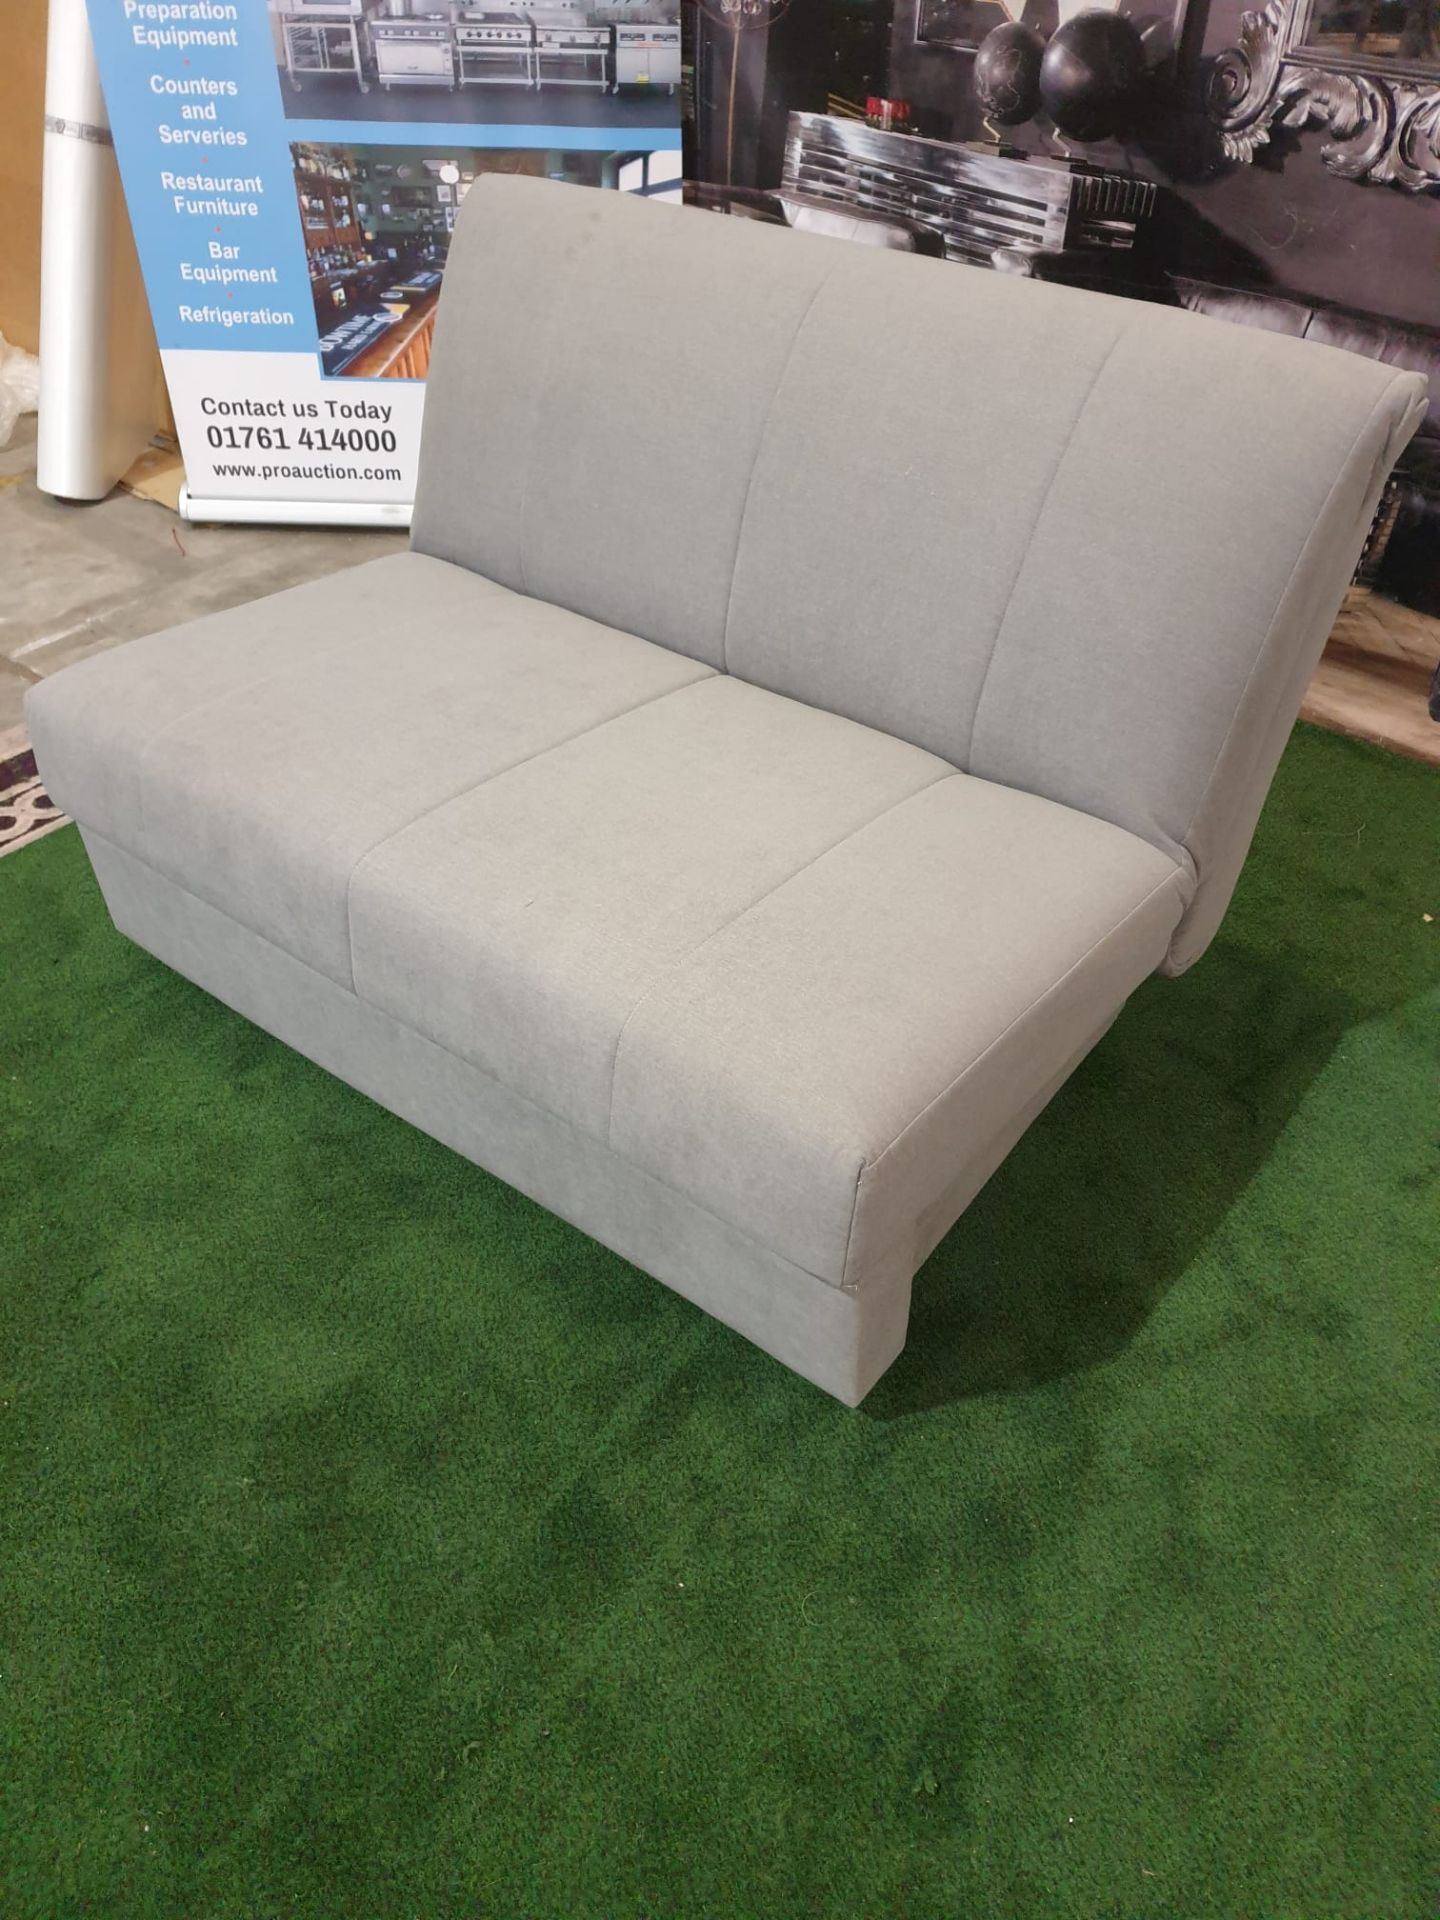 Sofa Bed Dreamworks Metz 120cm Berwick Stone Upholstered Double Sofabed UK made part of the